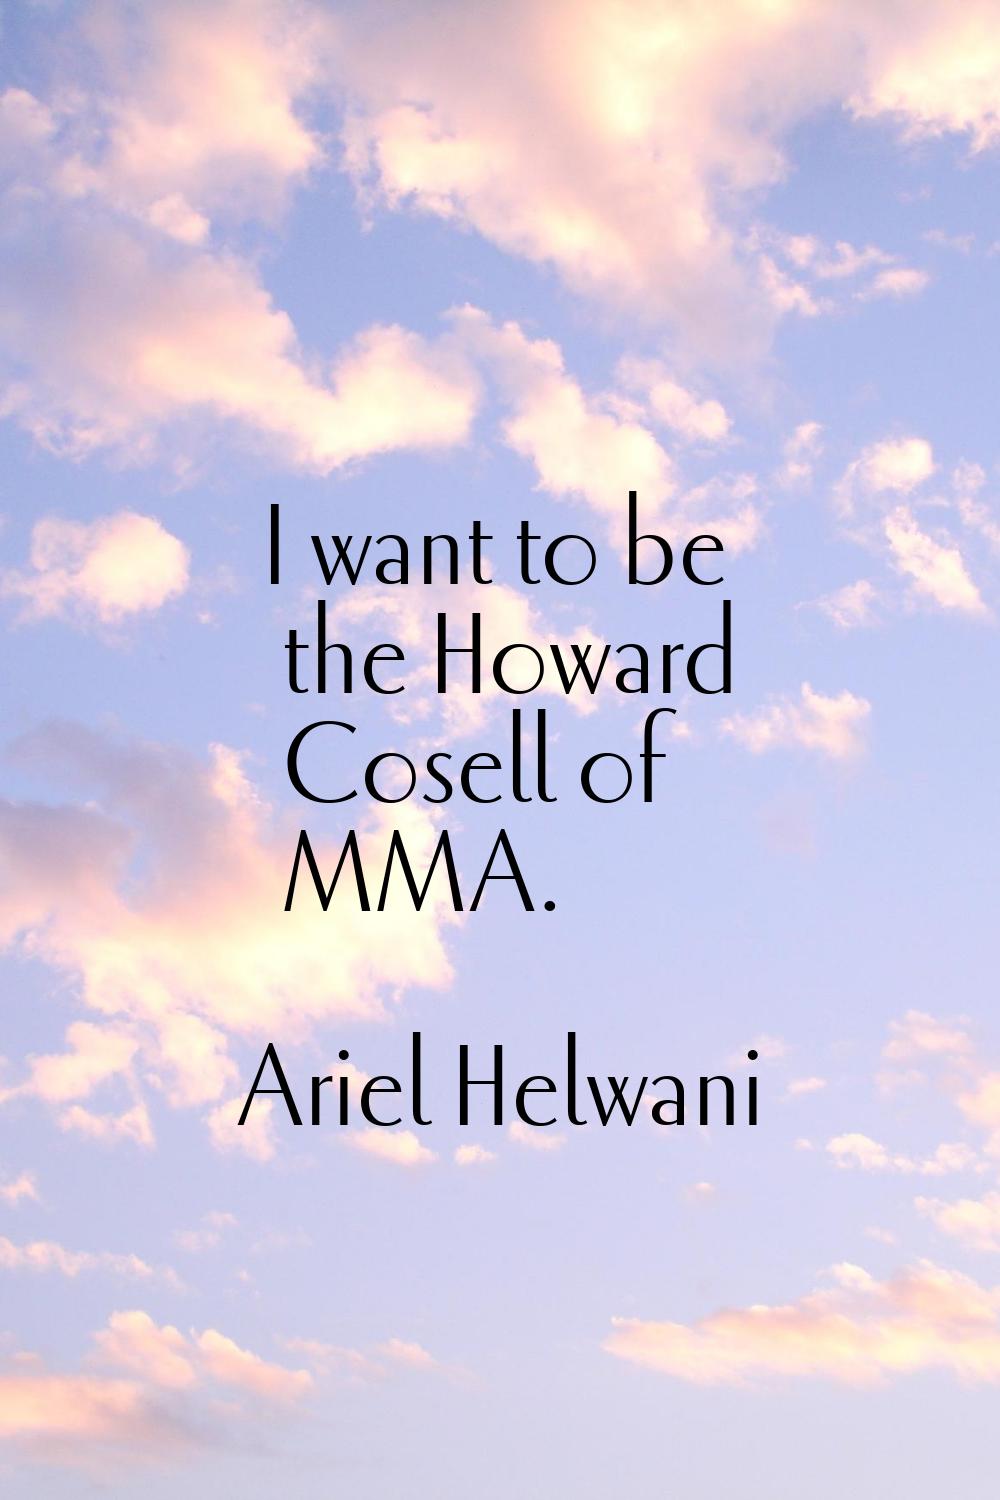 I want to be the Howard Cosell of MMA.